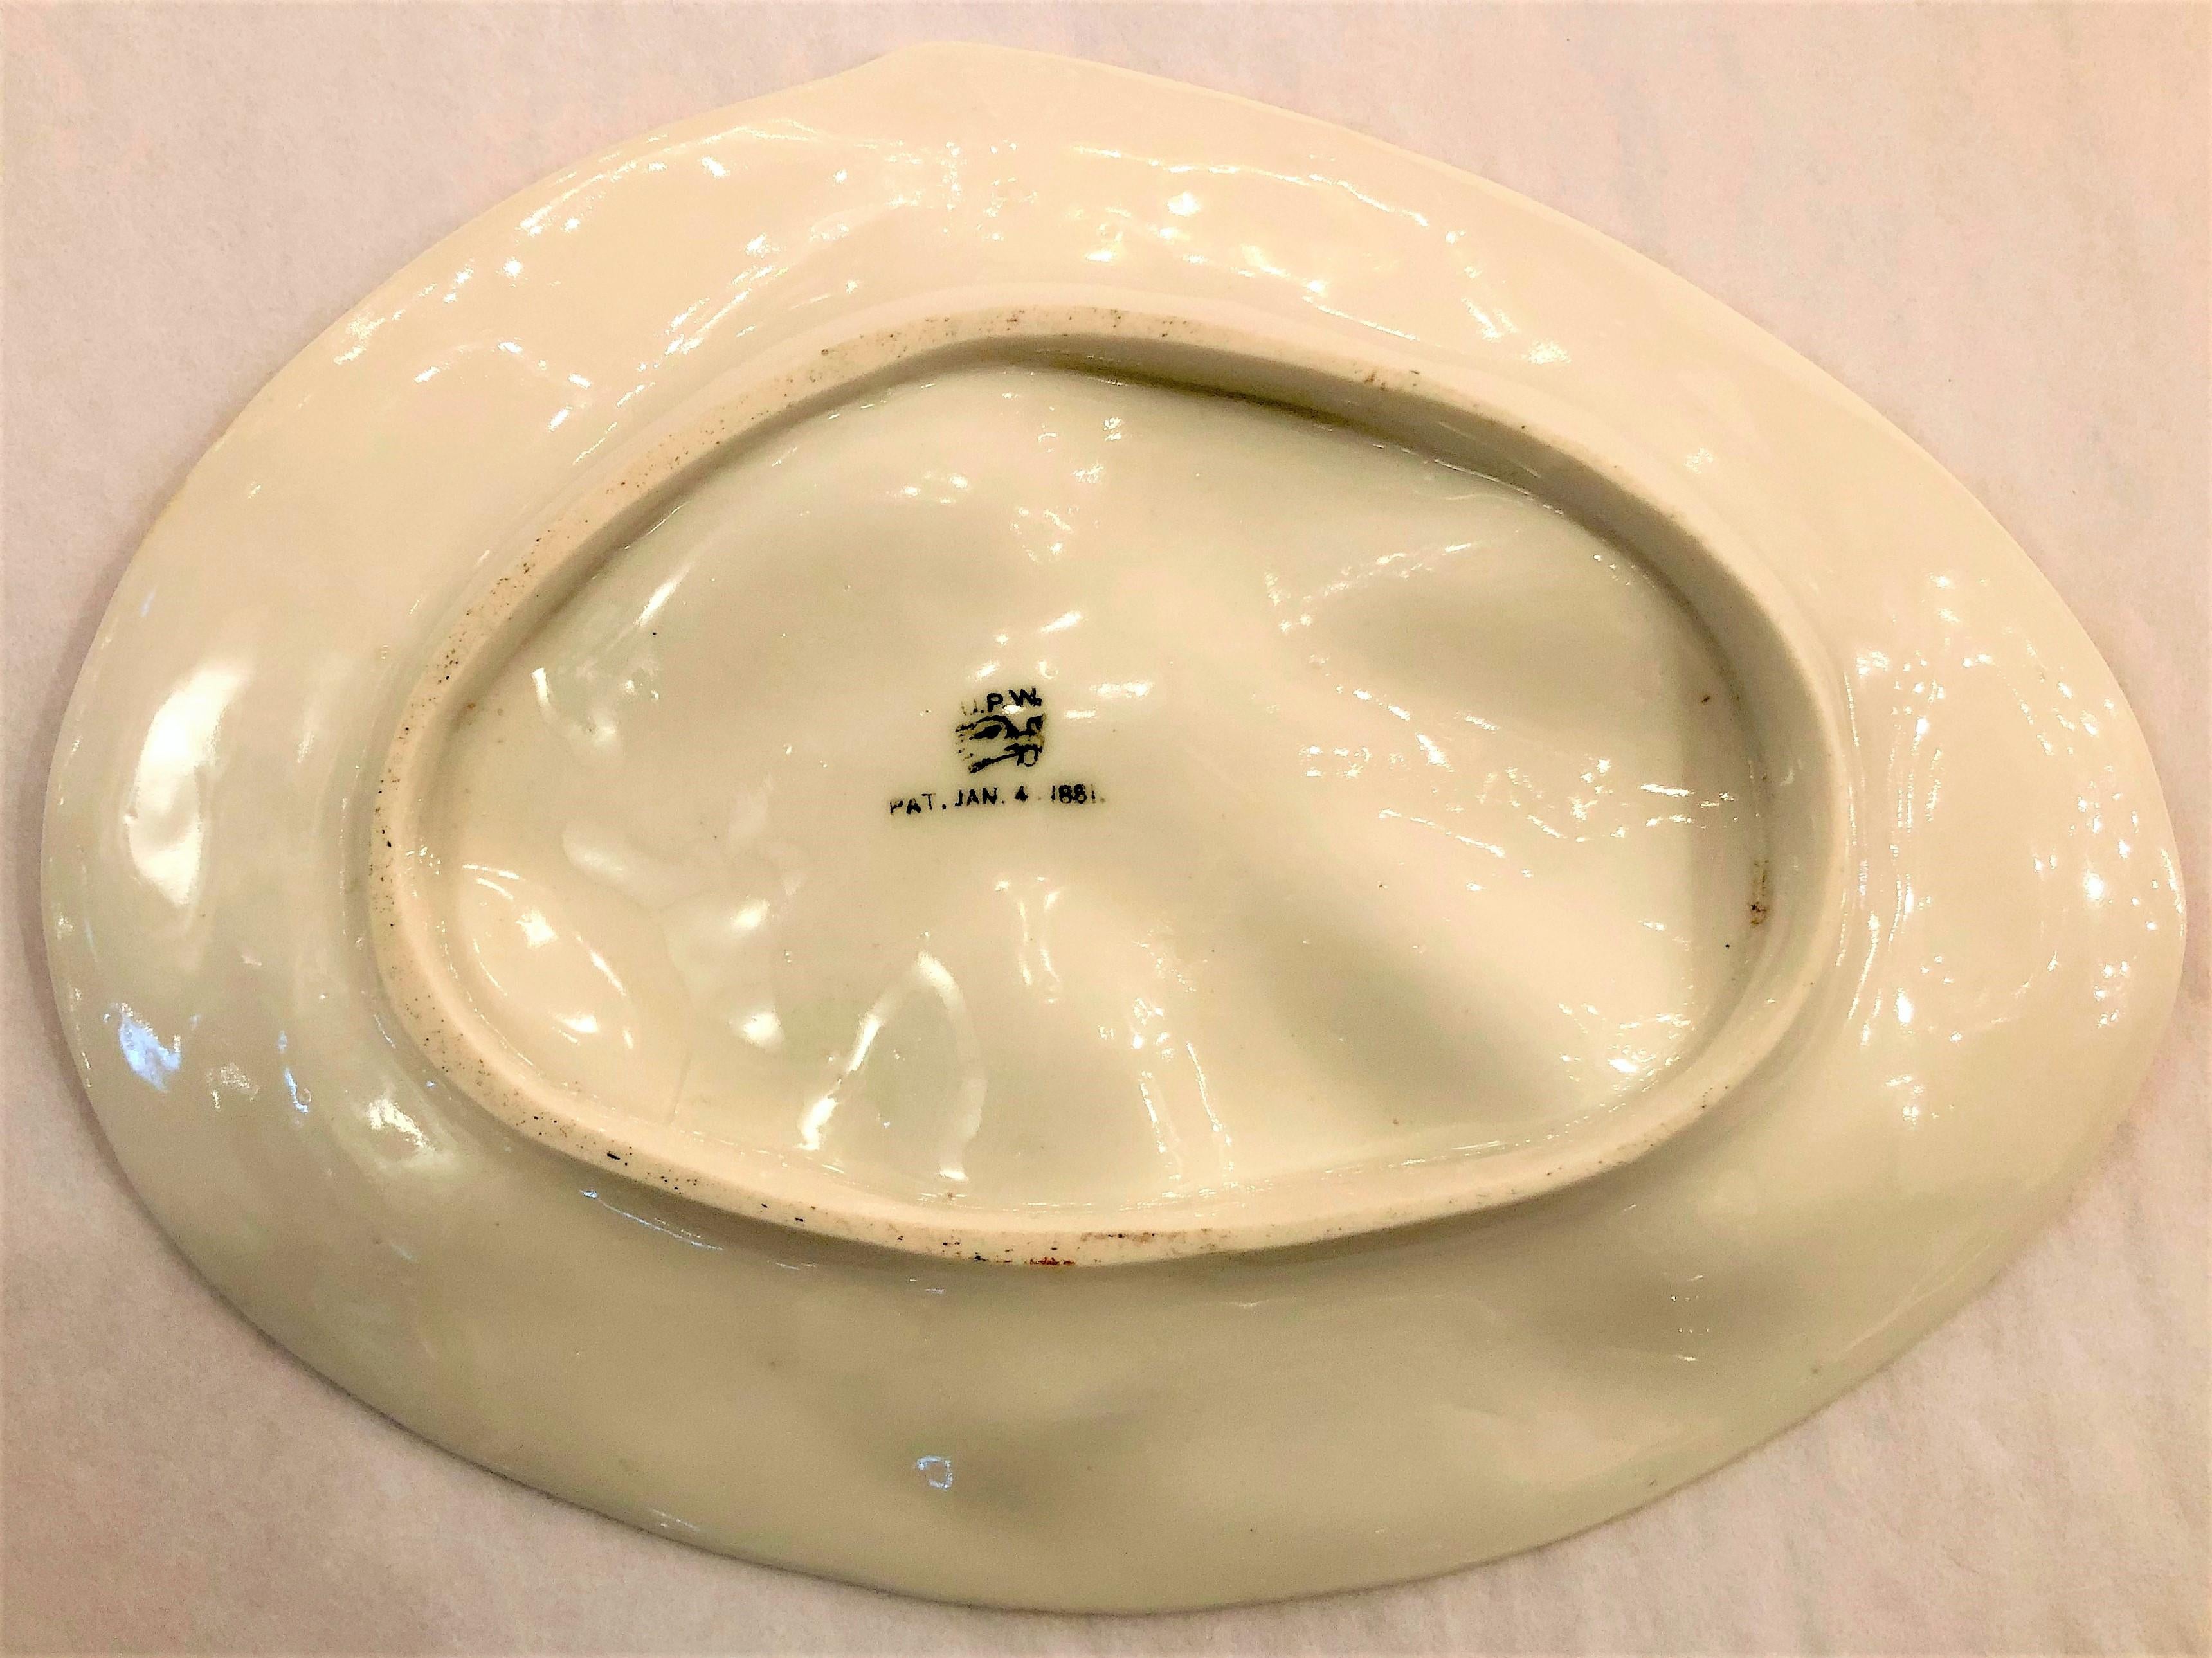 19th Century Antique American Porcelain Oyster Plate by Union Porcelain Works, circa 1880